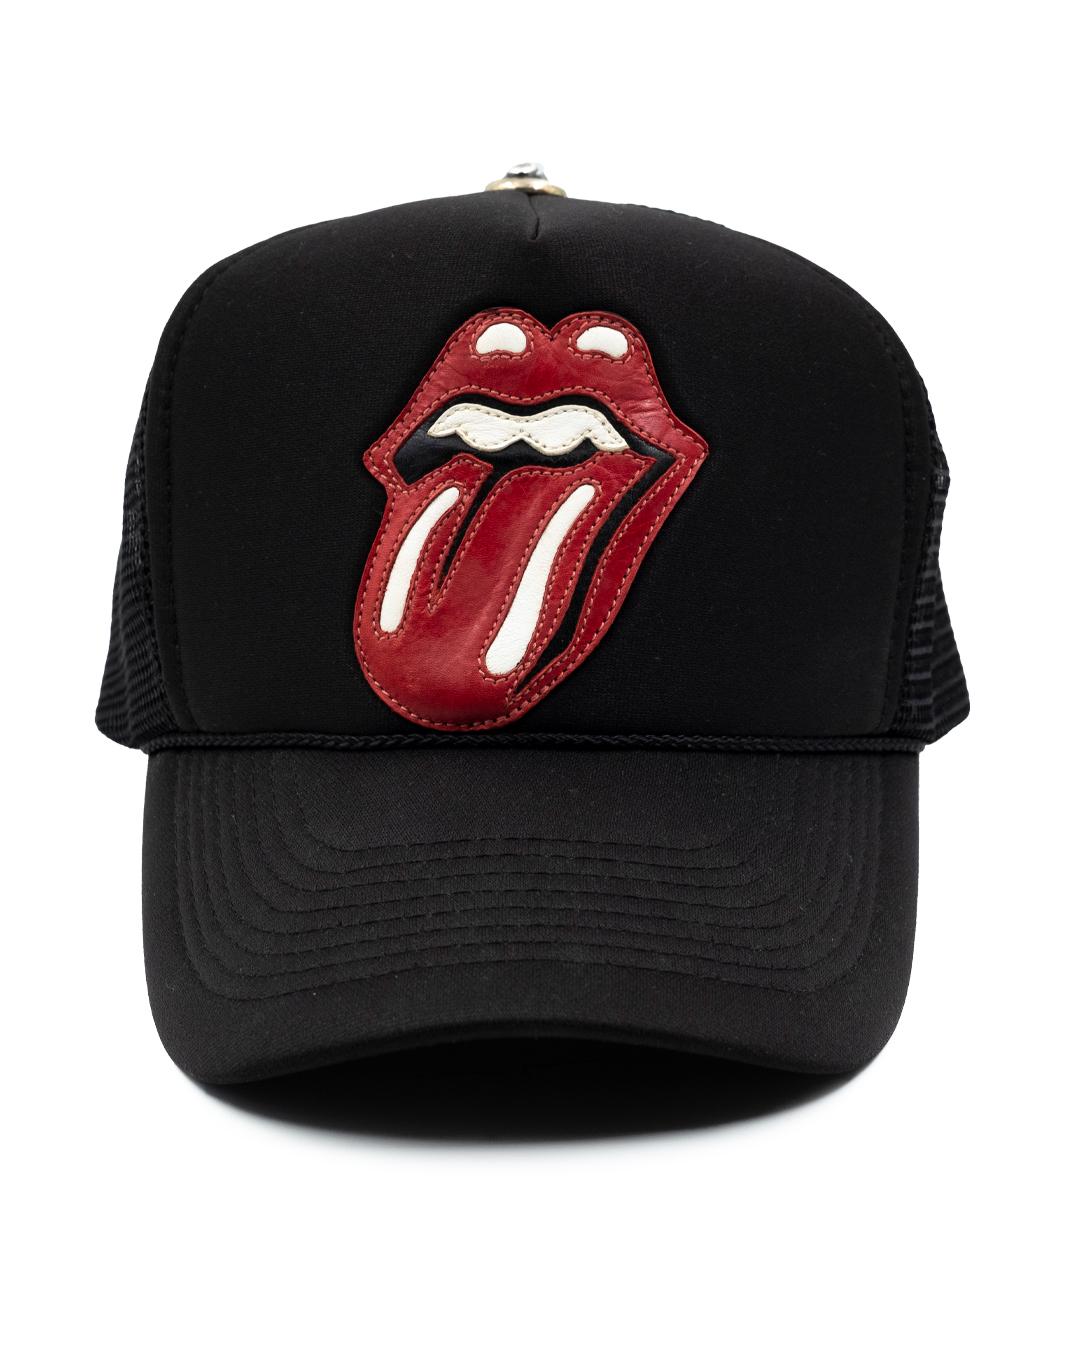 Condition: 9/10. No noticeable flaws.

Tagged size: One-size

Available in an iteration with the black lips & tongue logo, as well.